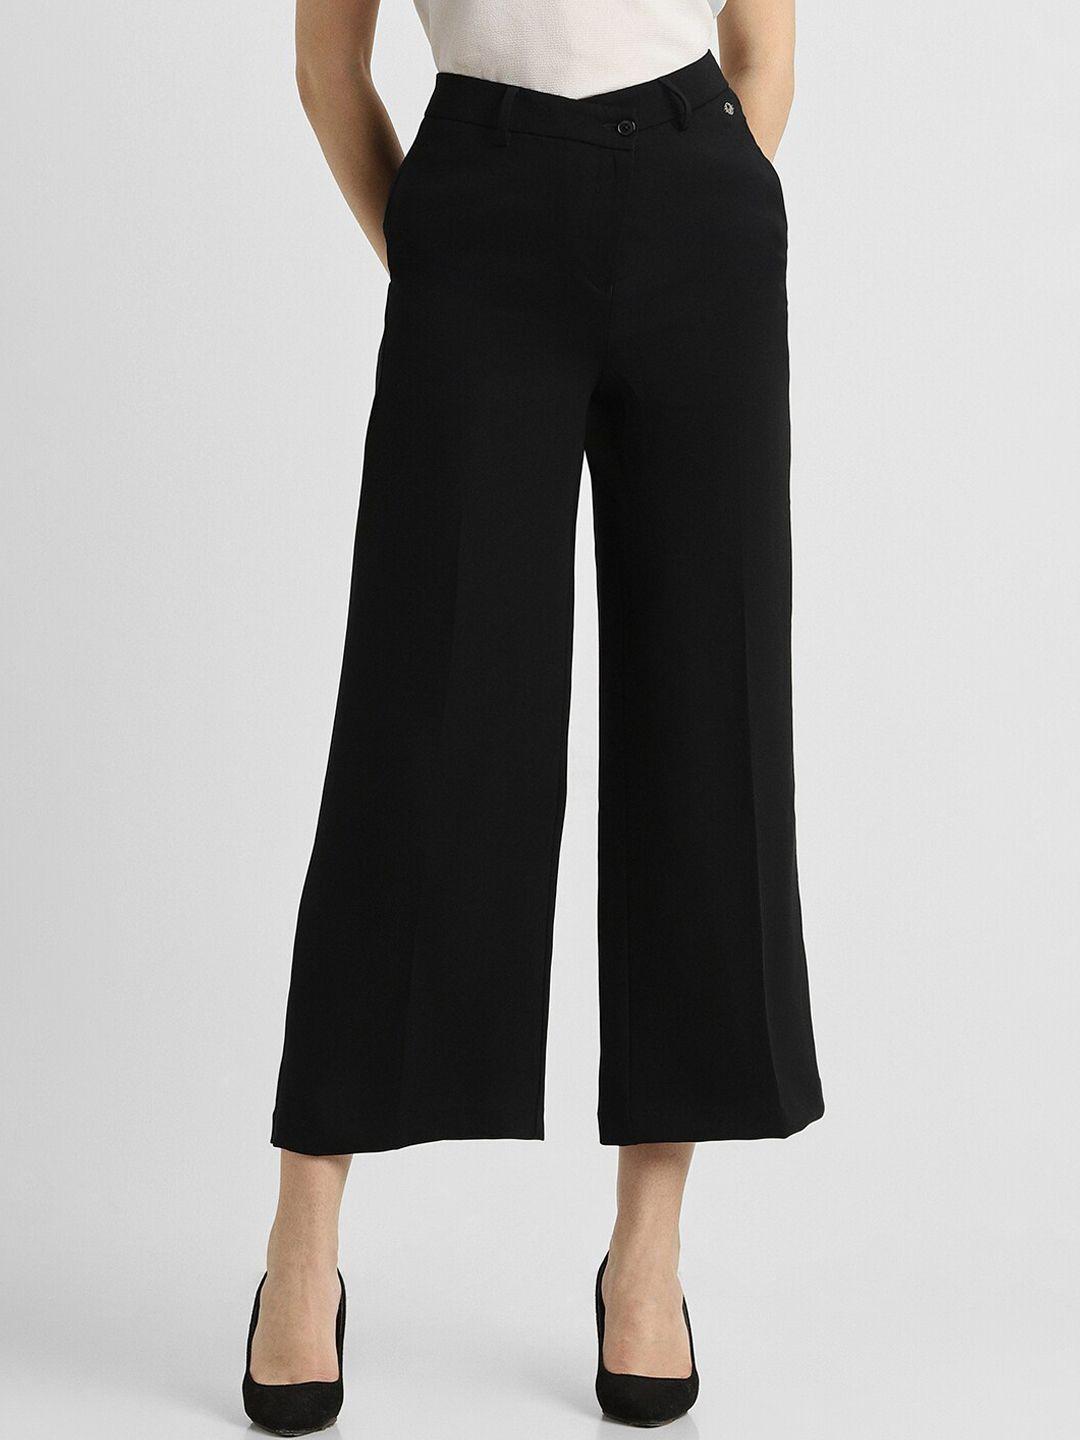 allen-solly-woman-mid-rise-parallel-trousers